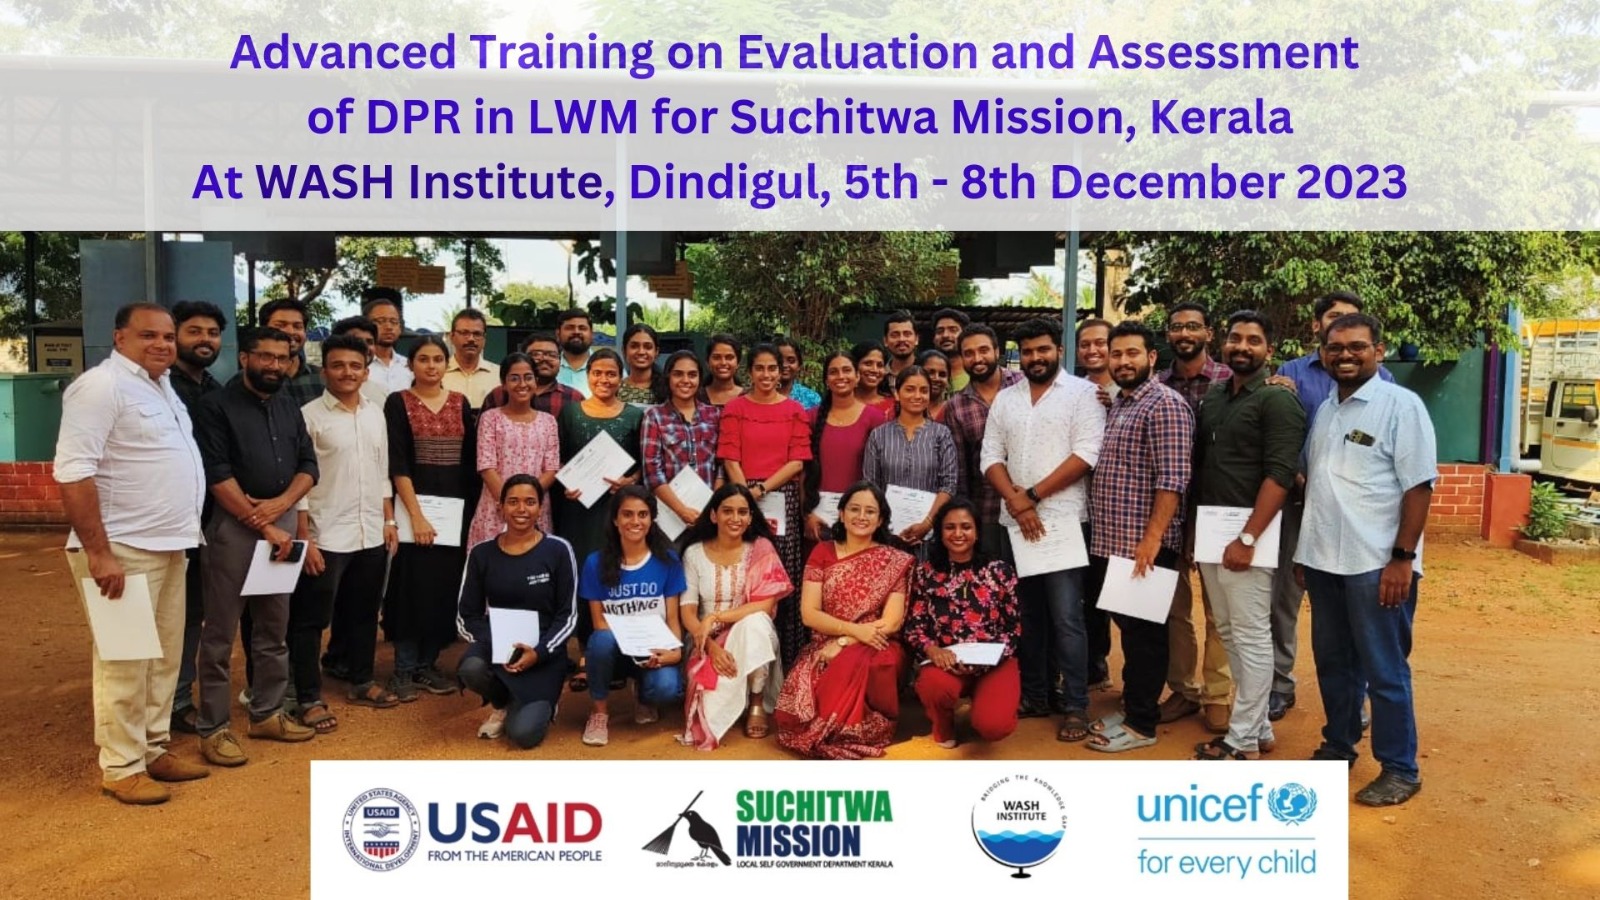 4 Day Advance Training from 5-8th December 2023 on Preparation and Evaluation of DPR in Liquid Waste Management Projects, WASH Institute, Dindigul, Tamil Nadu